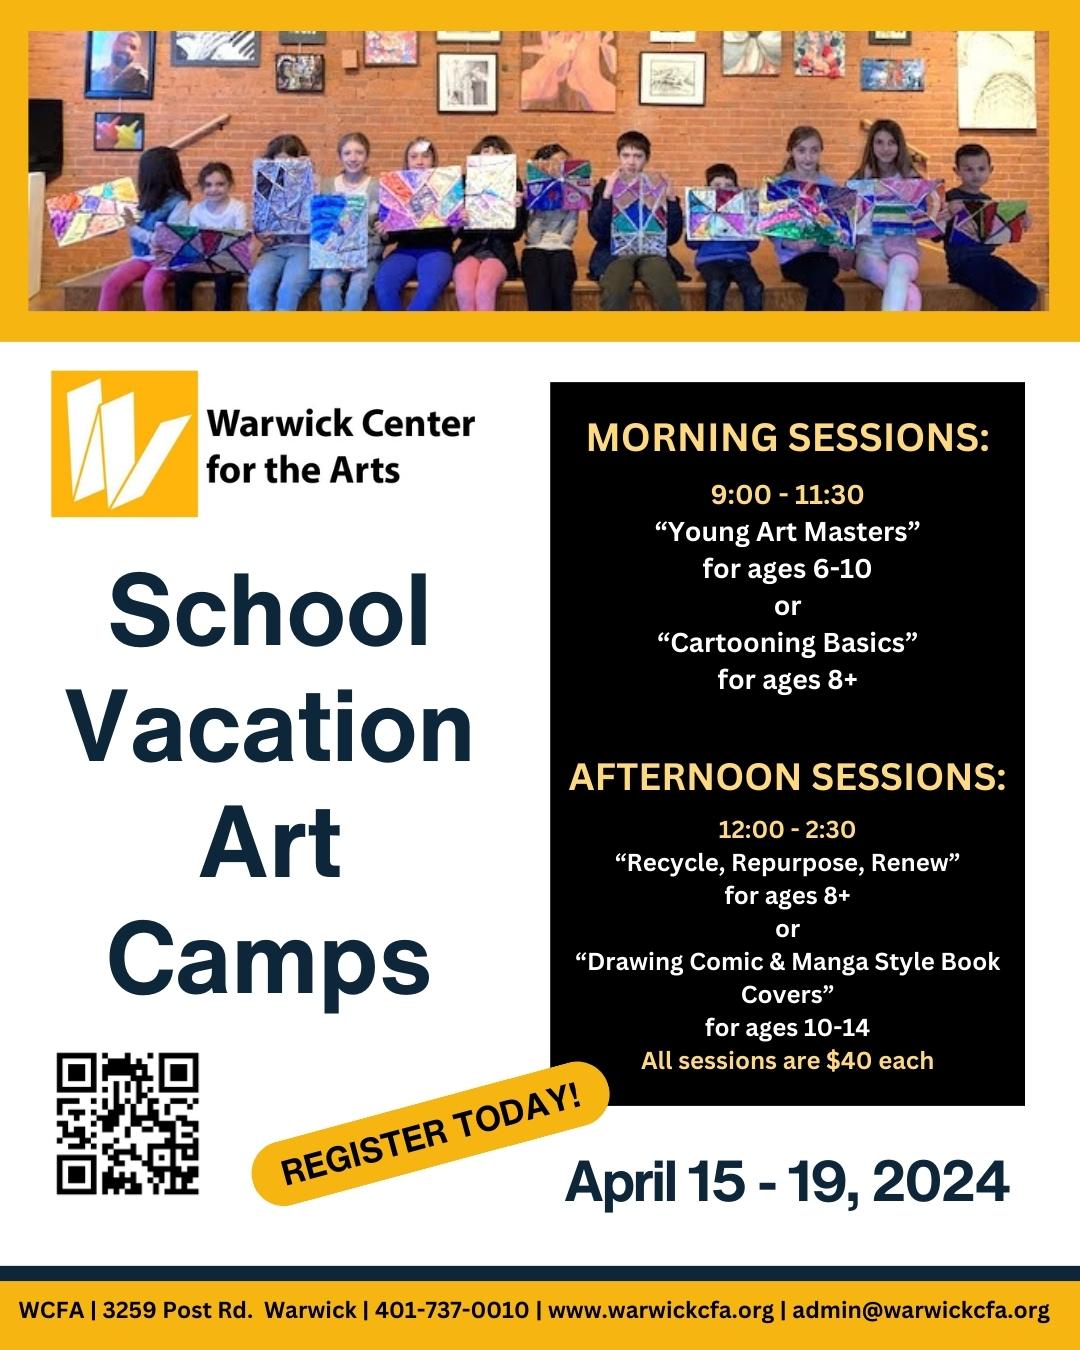 Warwick Cwenter for the Arts School VacaTION aRT cAMP fLYER